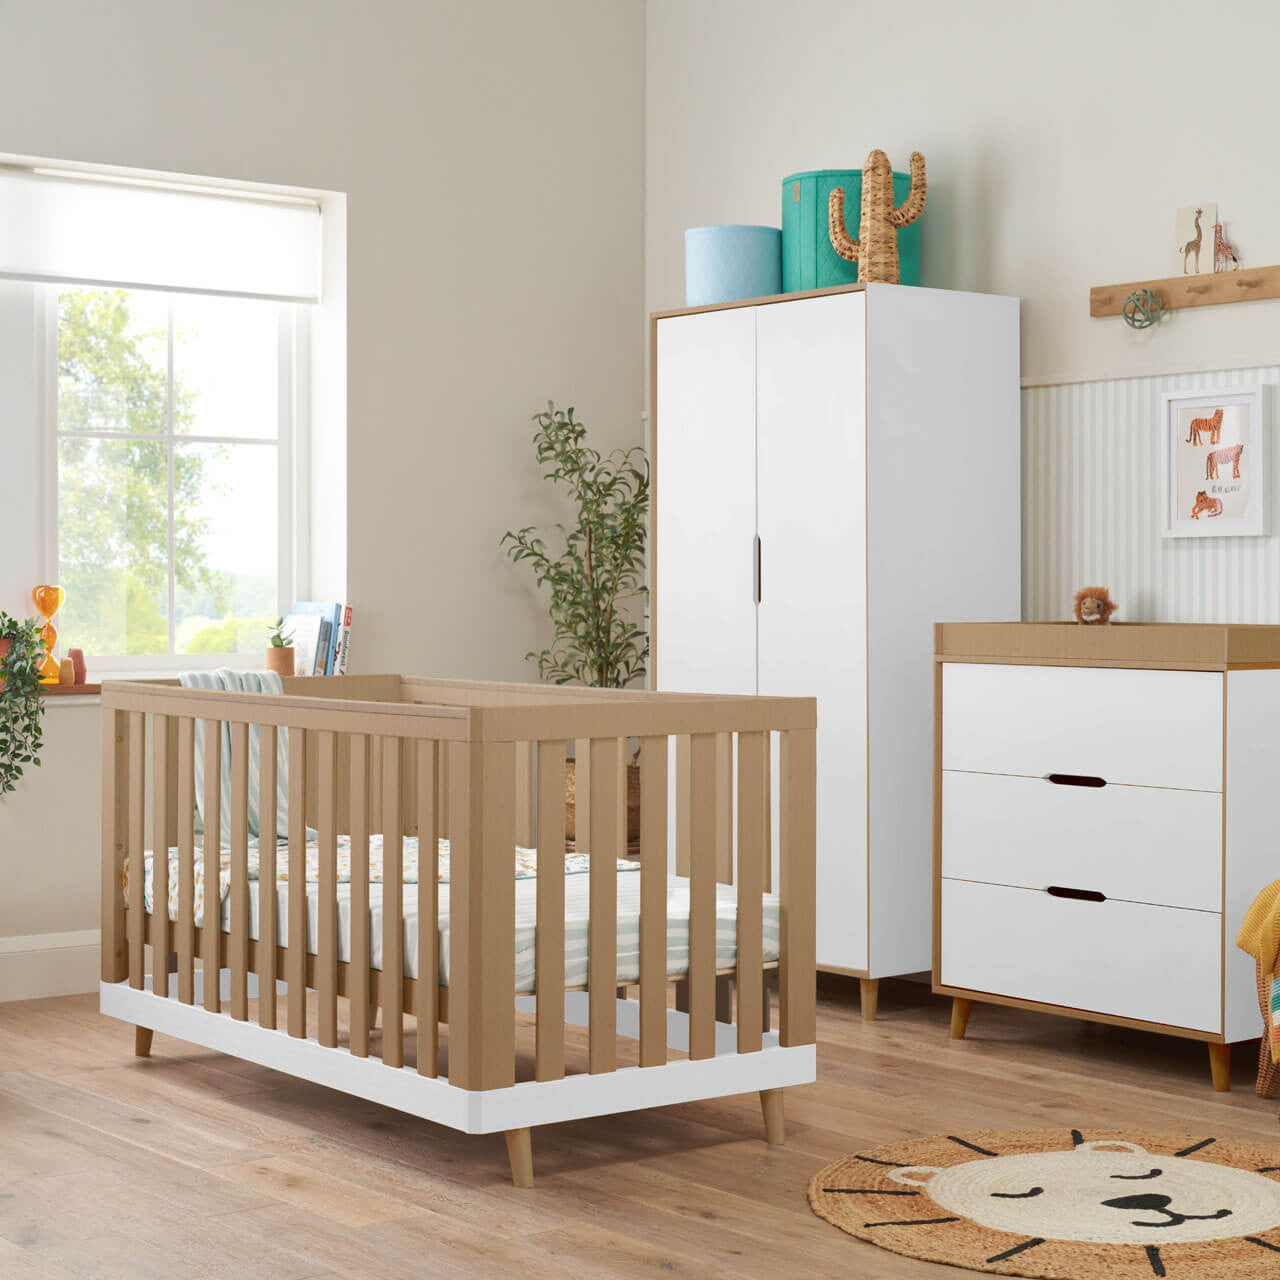 Tutti Bambini Hygge 3 Piece Room Set - White/Light Oak - For Your Little One